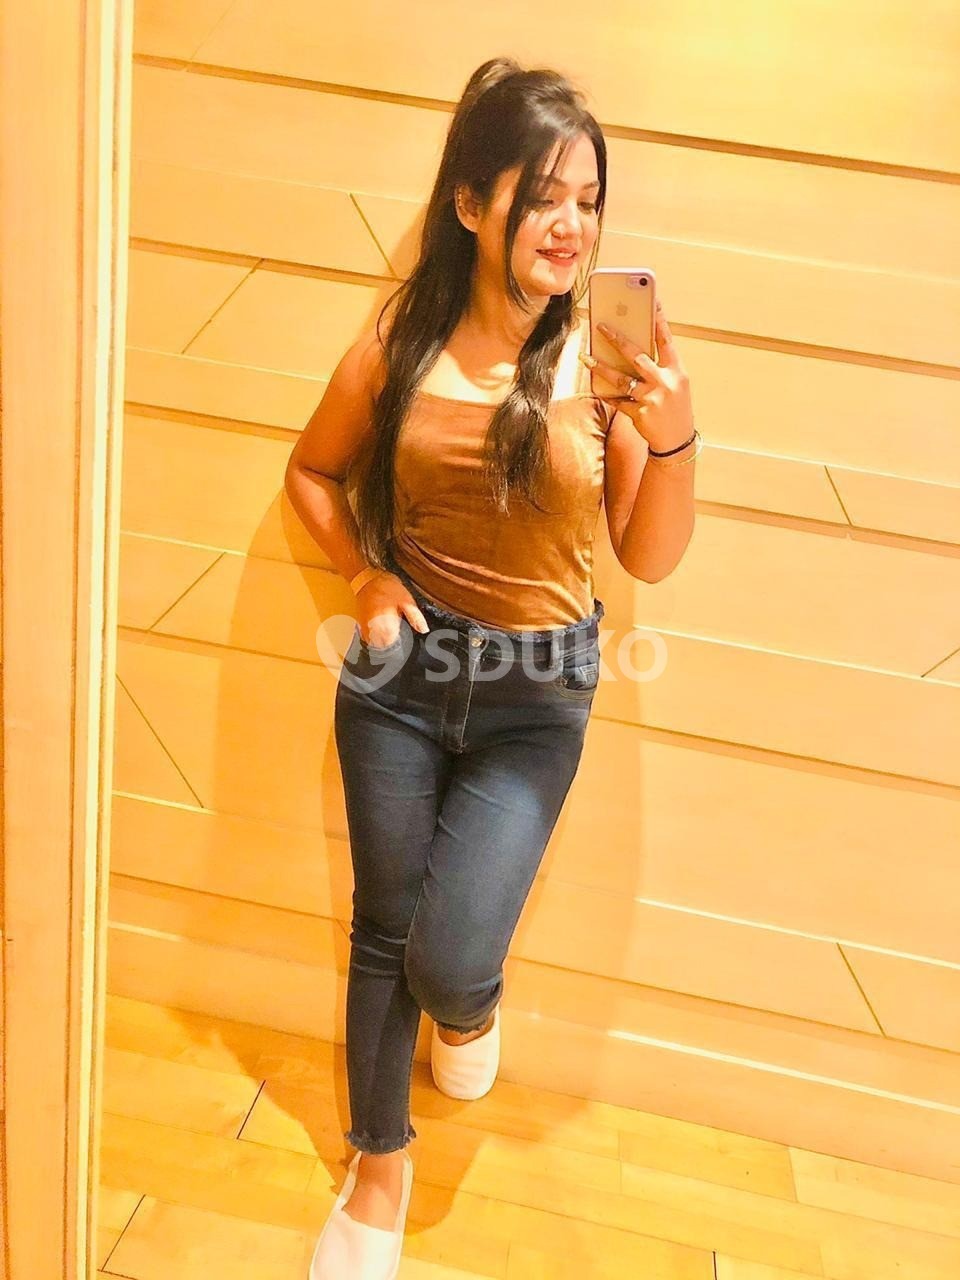 24X7 SERVICE AVAILABLE IN INDIRA NAGAR 100% SAFE AND SECURE TODAY LOW PRICE UNLIMITED ENJOY HOT COLLEGE GIRL HOUSEWIFE A